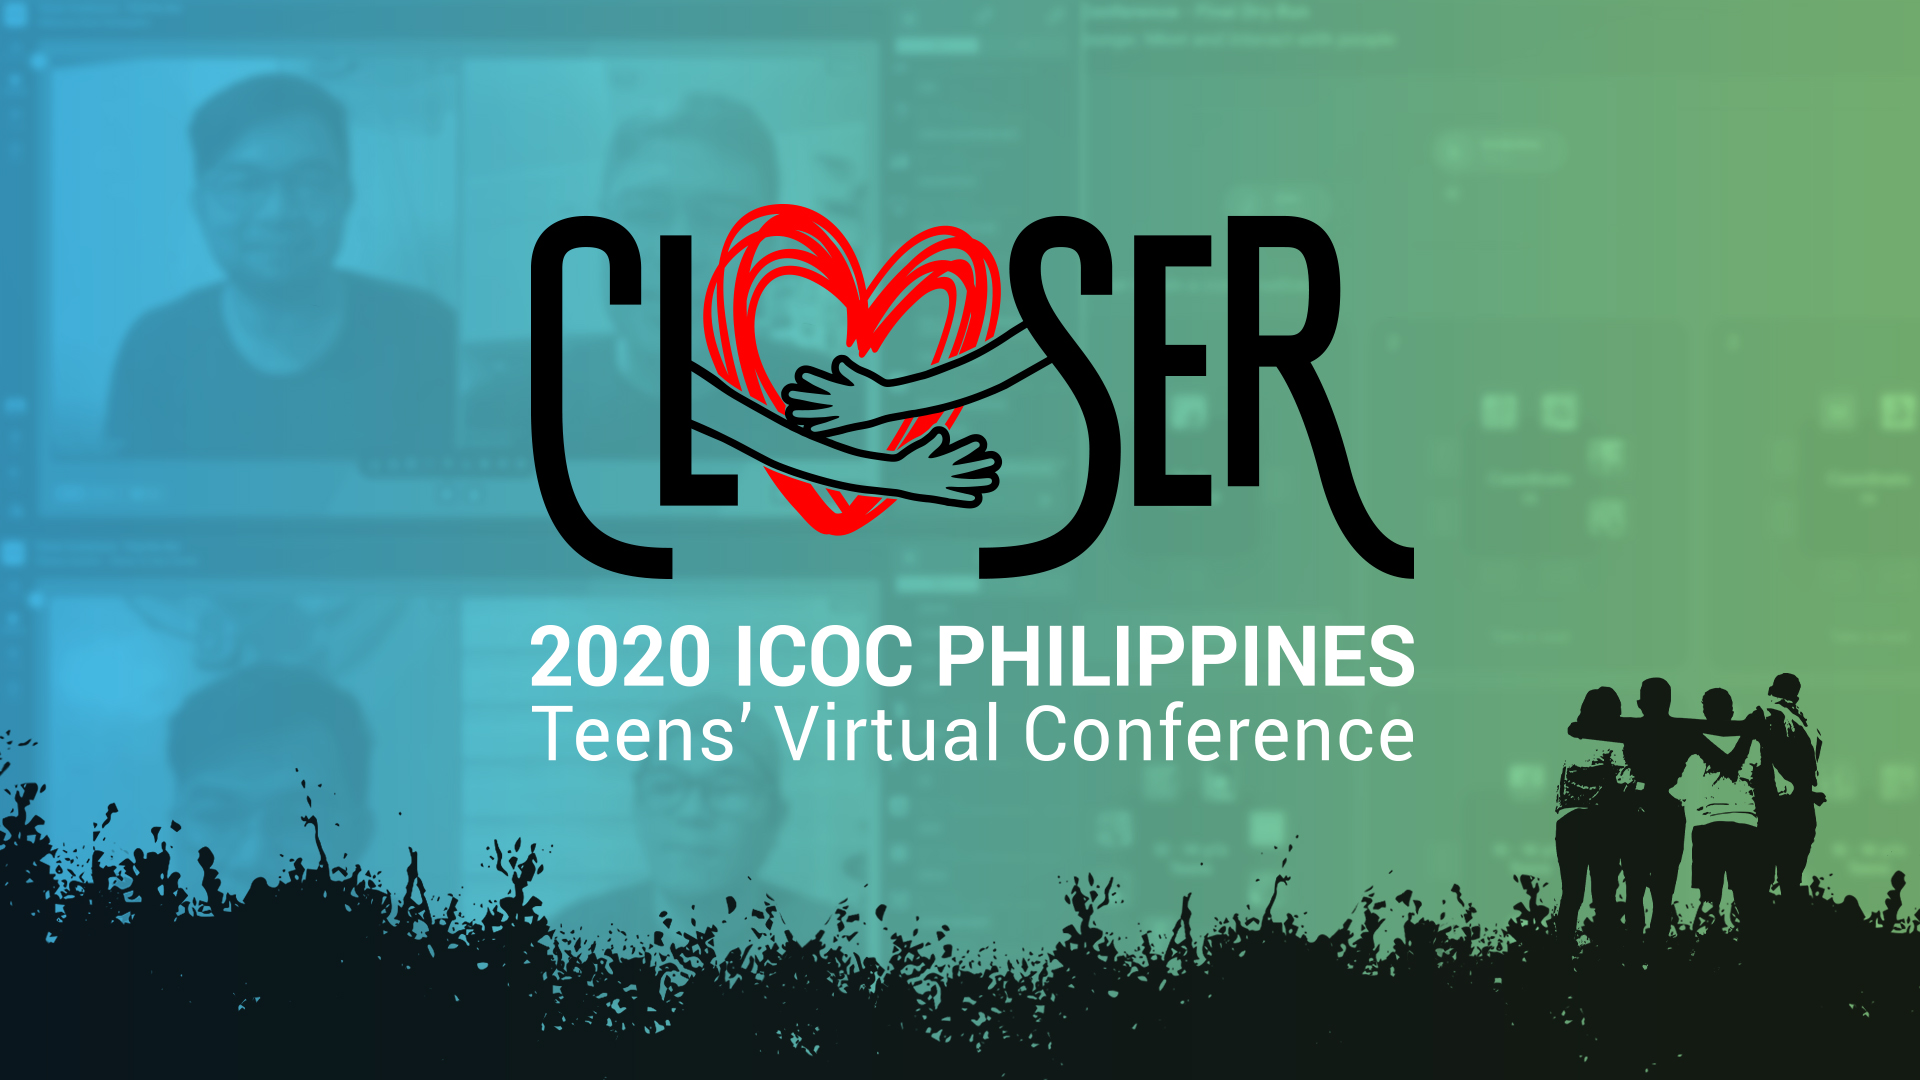 All set for 2020 ICOC Philippines Closer Teens’ Virtual Conference